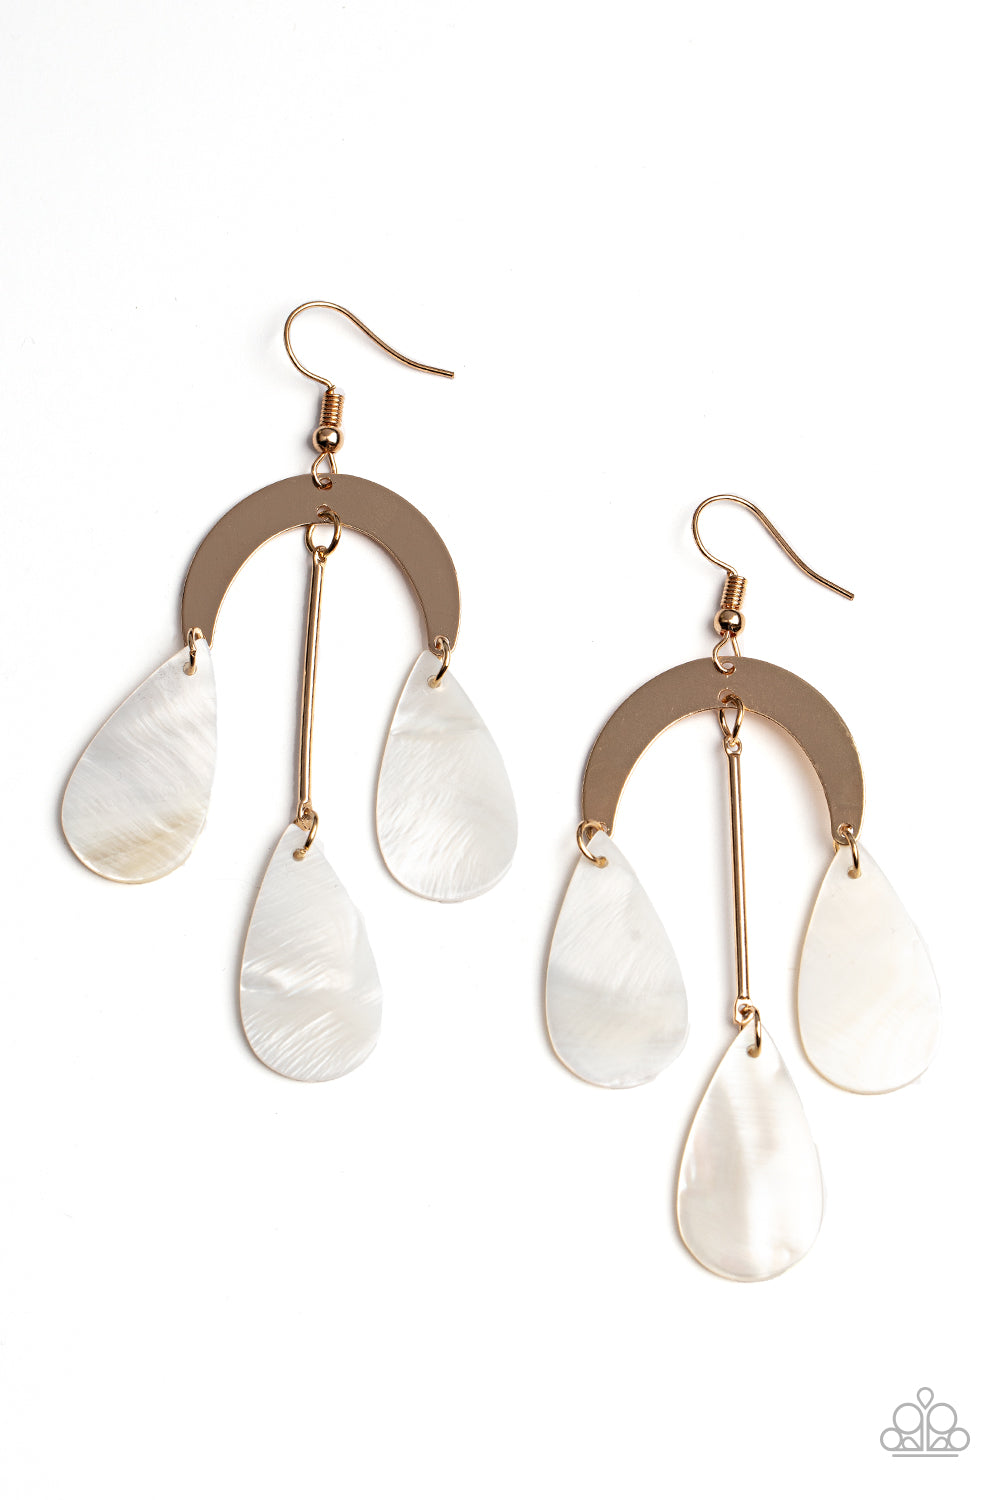 Paparazzi Atlantis Ambience - Gold Earrings qhite shell-like teardrops trickle from the bottom of a gold rod and gold half moon frame, creating an ocean inspired chandelier. Earring attaches to a standard fishhook fitting.  Sold as one pair of earrings.